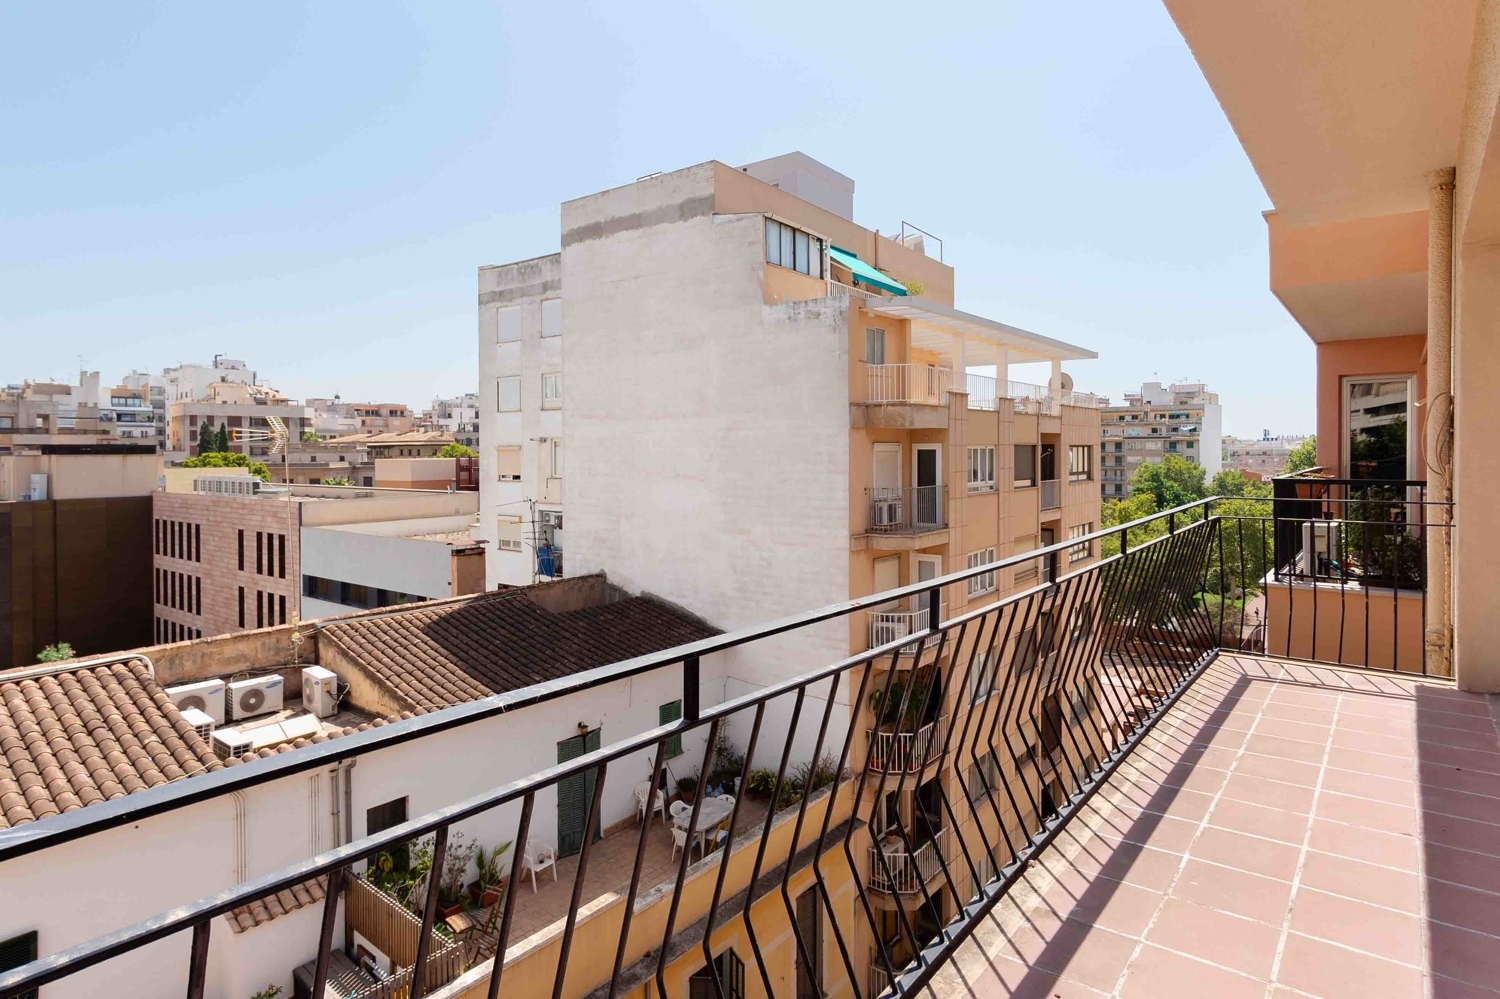 MODERN, BRIGHT APARTMENT WITH TERRACE & ELEVATOR IN PALMA OLD TOWN